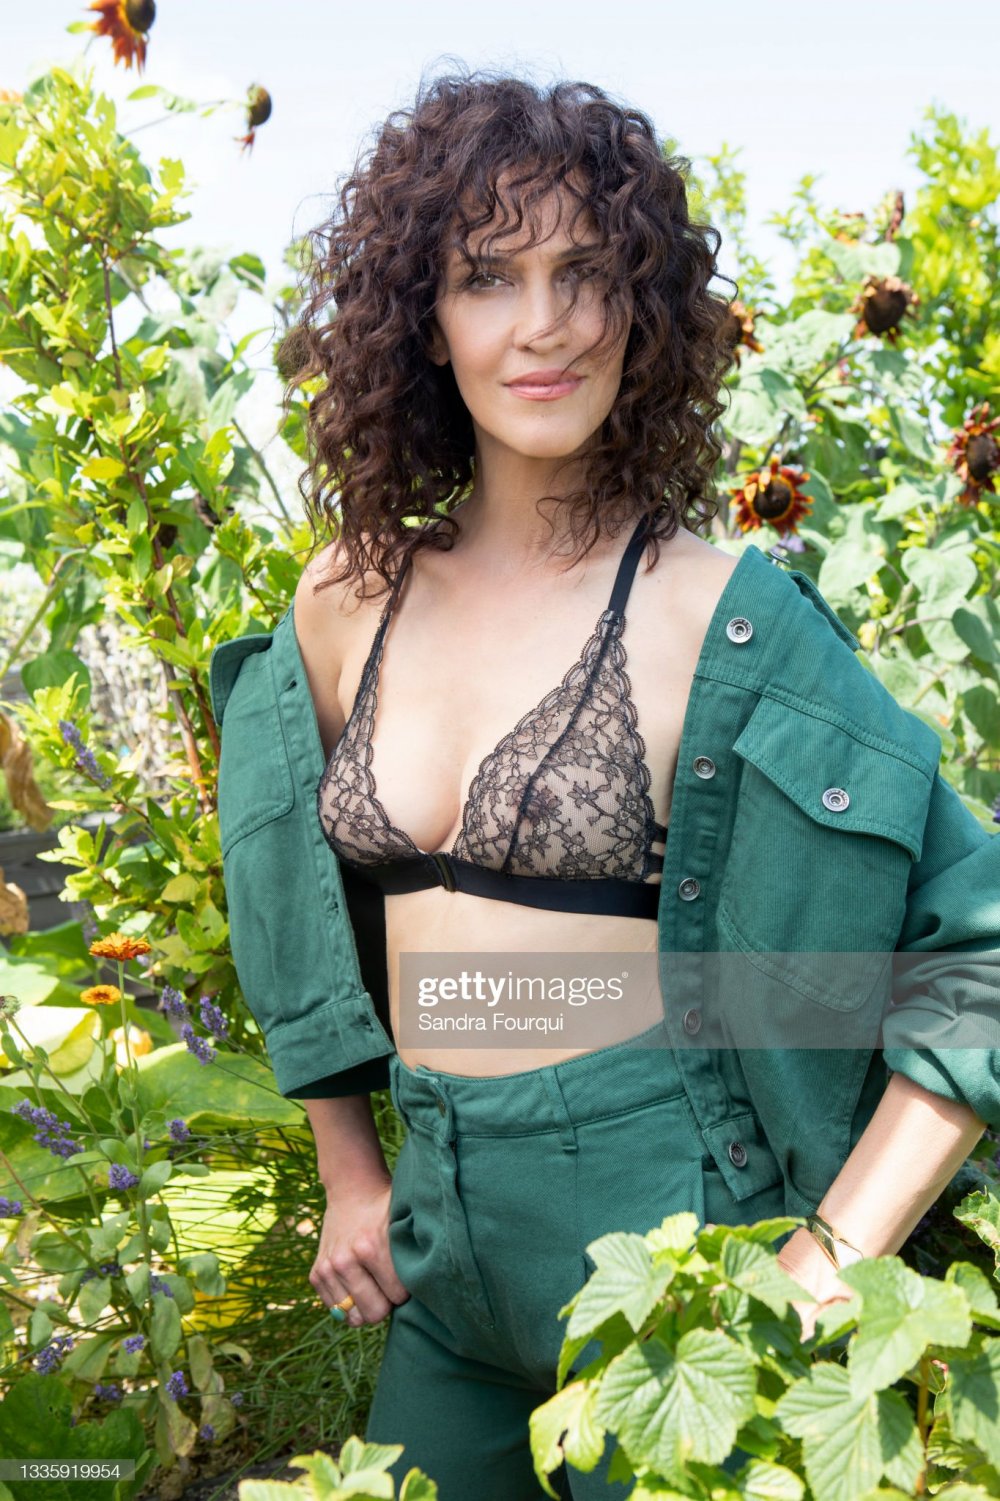 gettyimages-1335919954-2048x2048.jpg